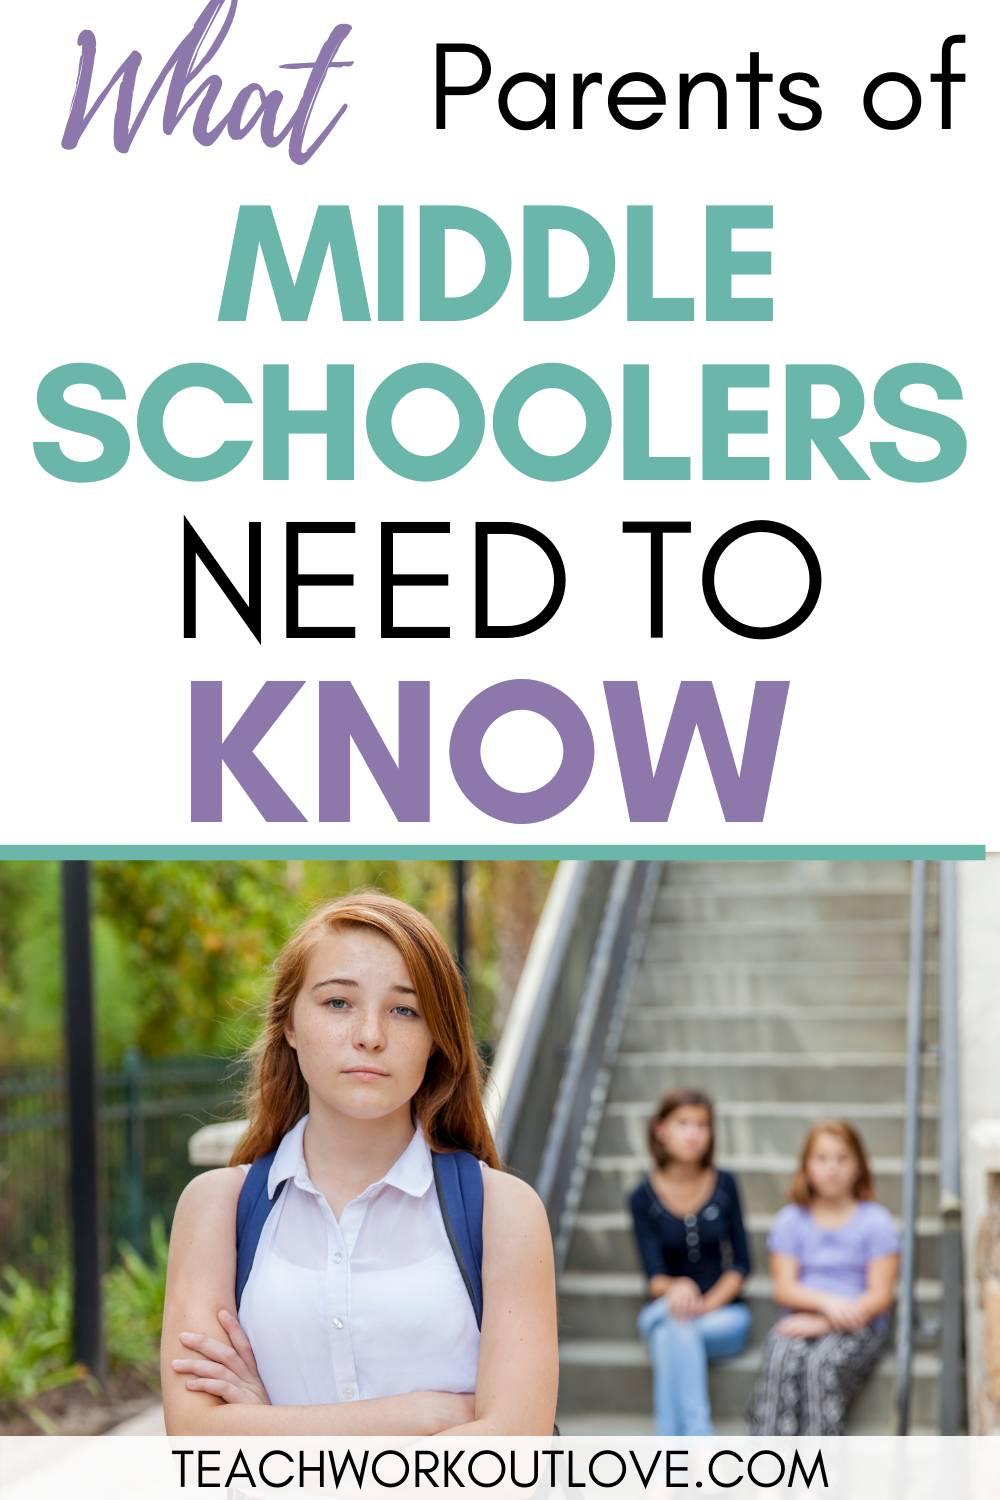 Here are things parents of middle schoolers should know in order to make our kid's future transformation to high school go as easily as possible.